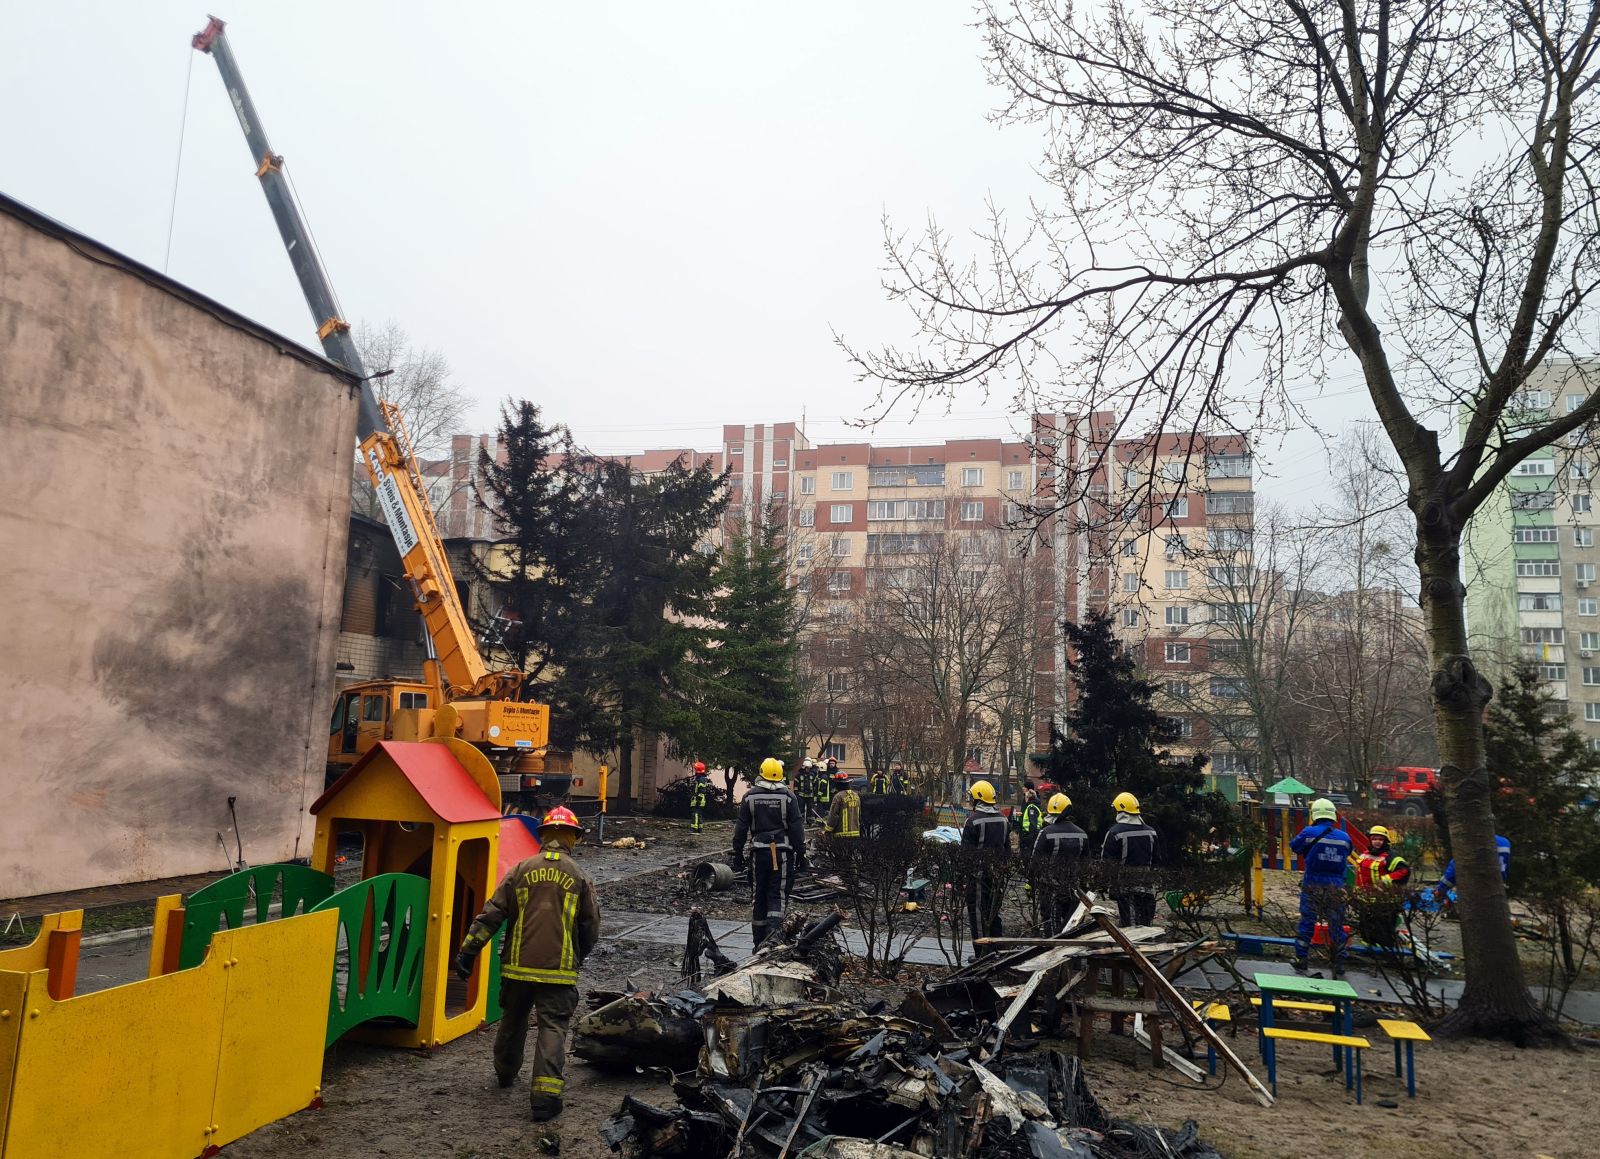 epa10412803 Rescue services work at the scene of a helicopter crash in Brovary, near Kyiv, Ukraine, 18 January 2023. At least 18 people died, including three children, after a helicopter crashed near a kindergarten and a residential building in the city of Brovary, Oleksiy Kuleba, the head of Kyiv Regional Military Administration wrote on telegram. A rescue operation was underway at the site, he added. As a result of the crash, the leadership of the Ministry of Internal Affairs died: the minister, the first deputy minister and the state secretary, according to the chief of Ukraine's National Police, Ihor Klymenko.  EPA/SERGEY DOLZHENKO